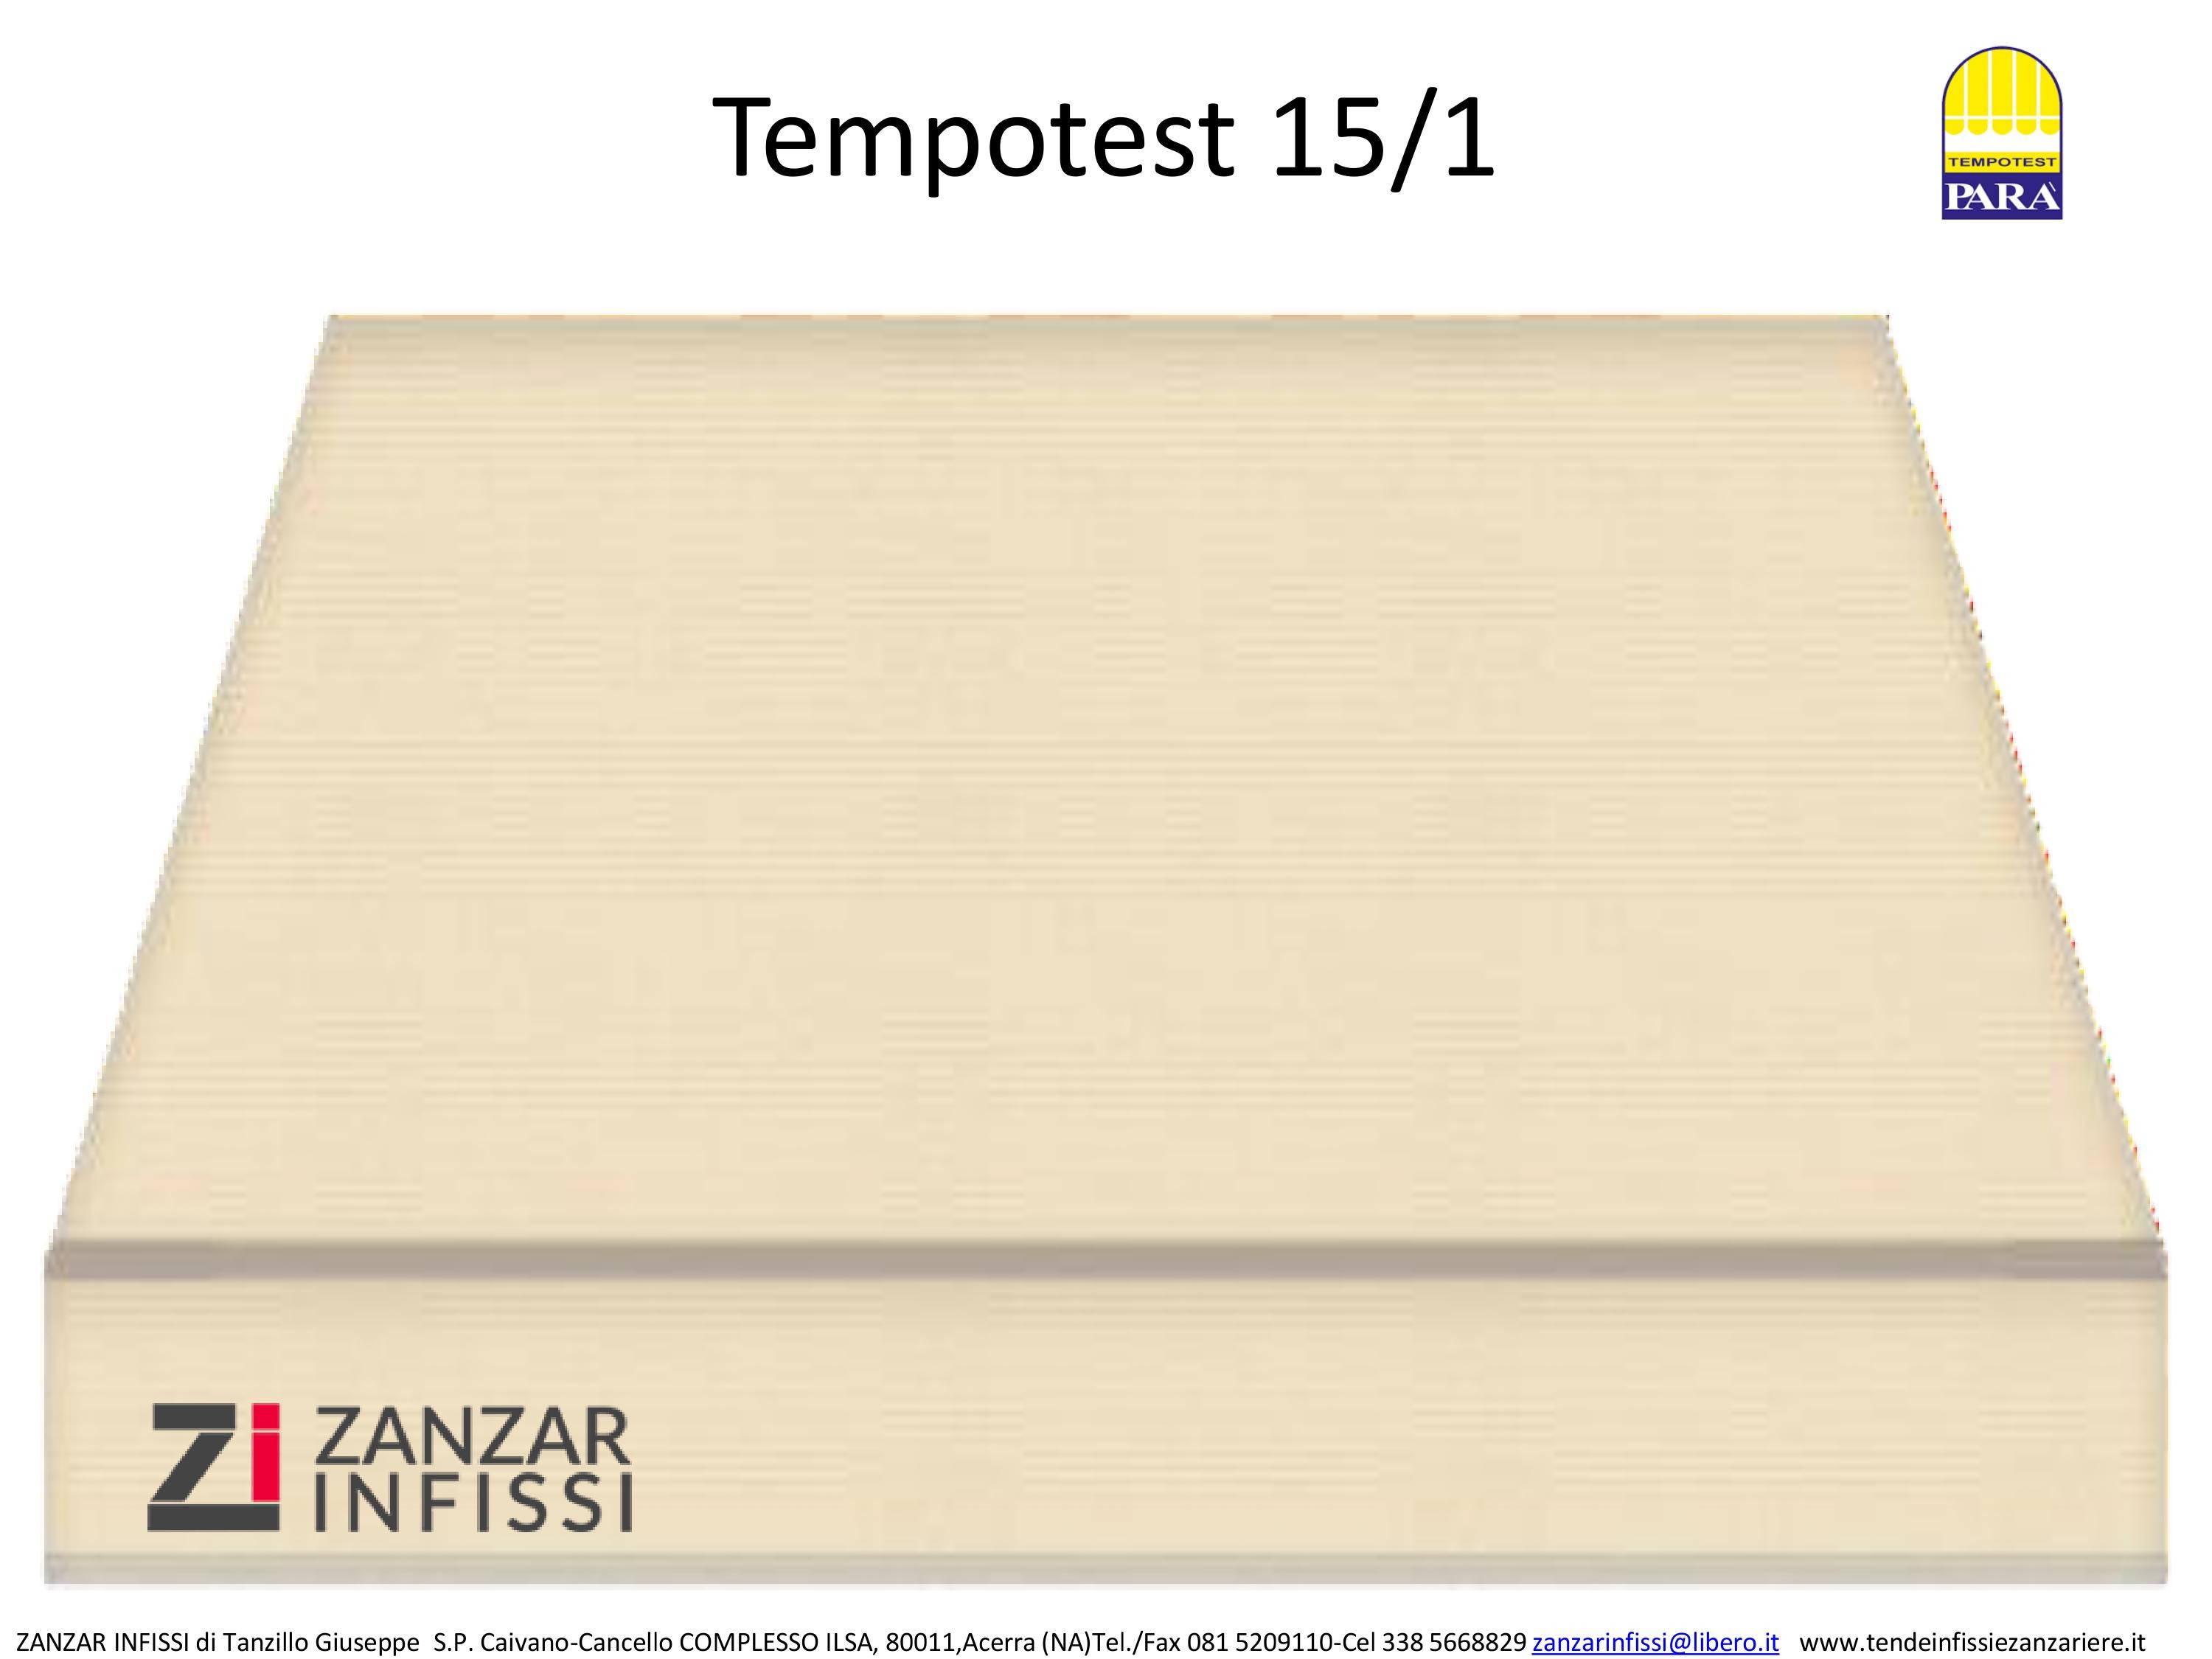 Tempotest 15/1